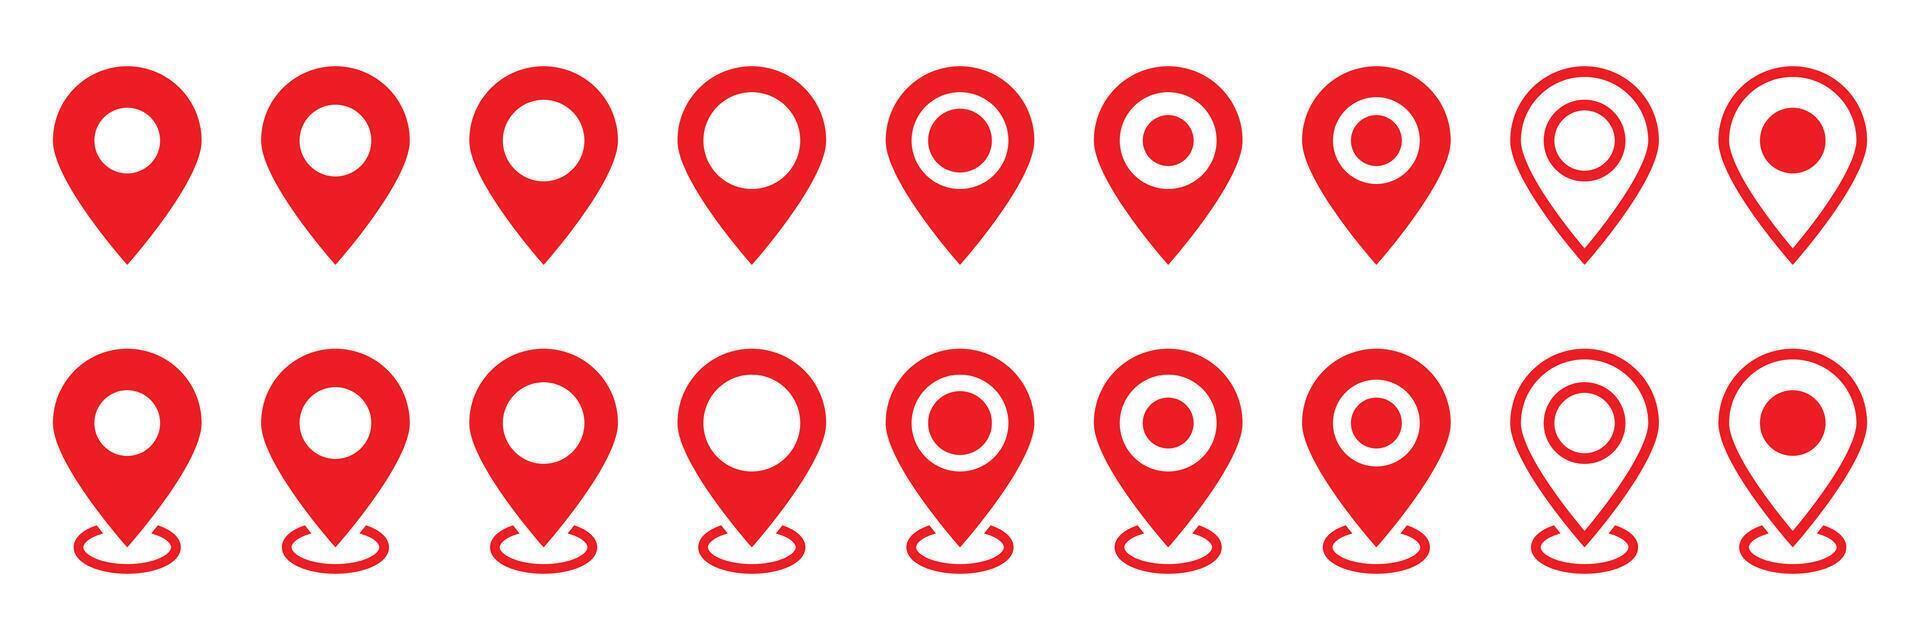 Maps pin. Red location map icon. Navigation gps sign. vector